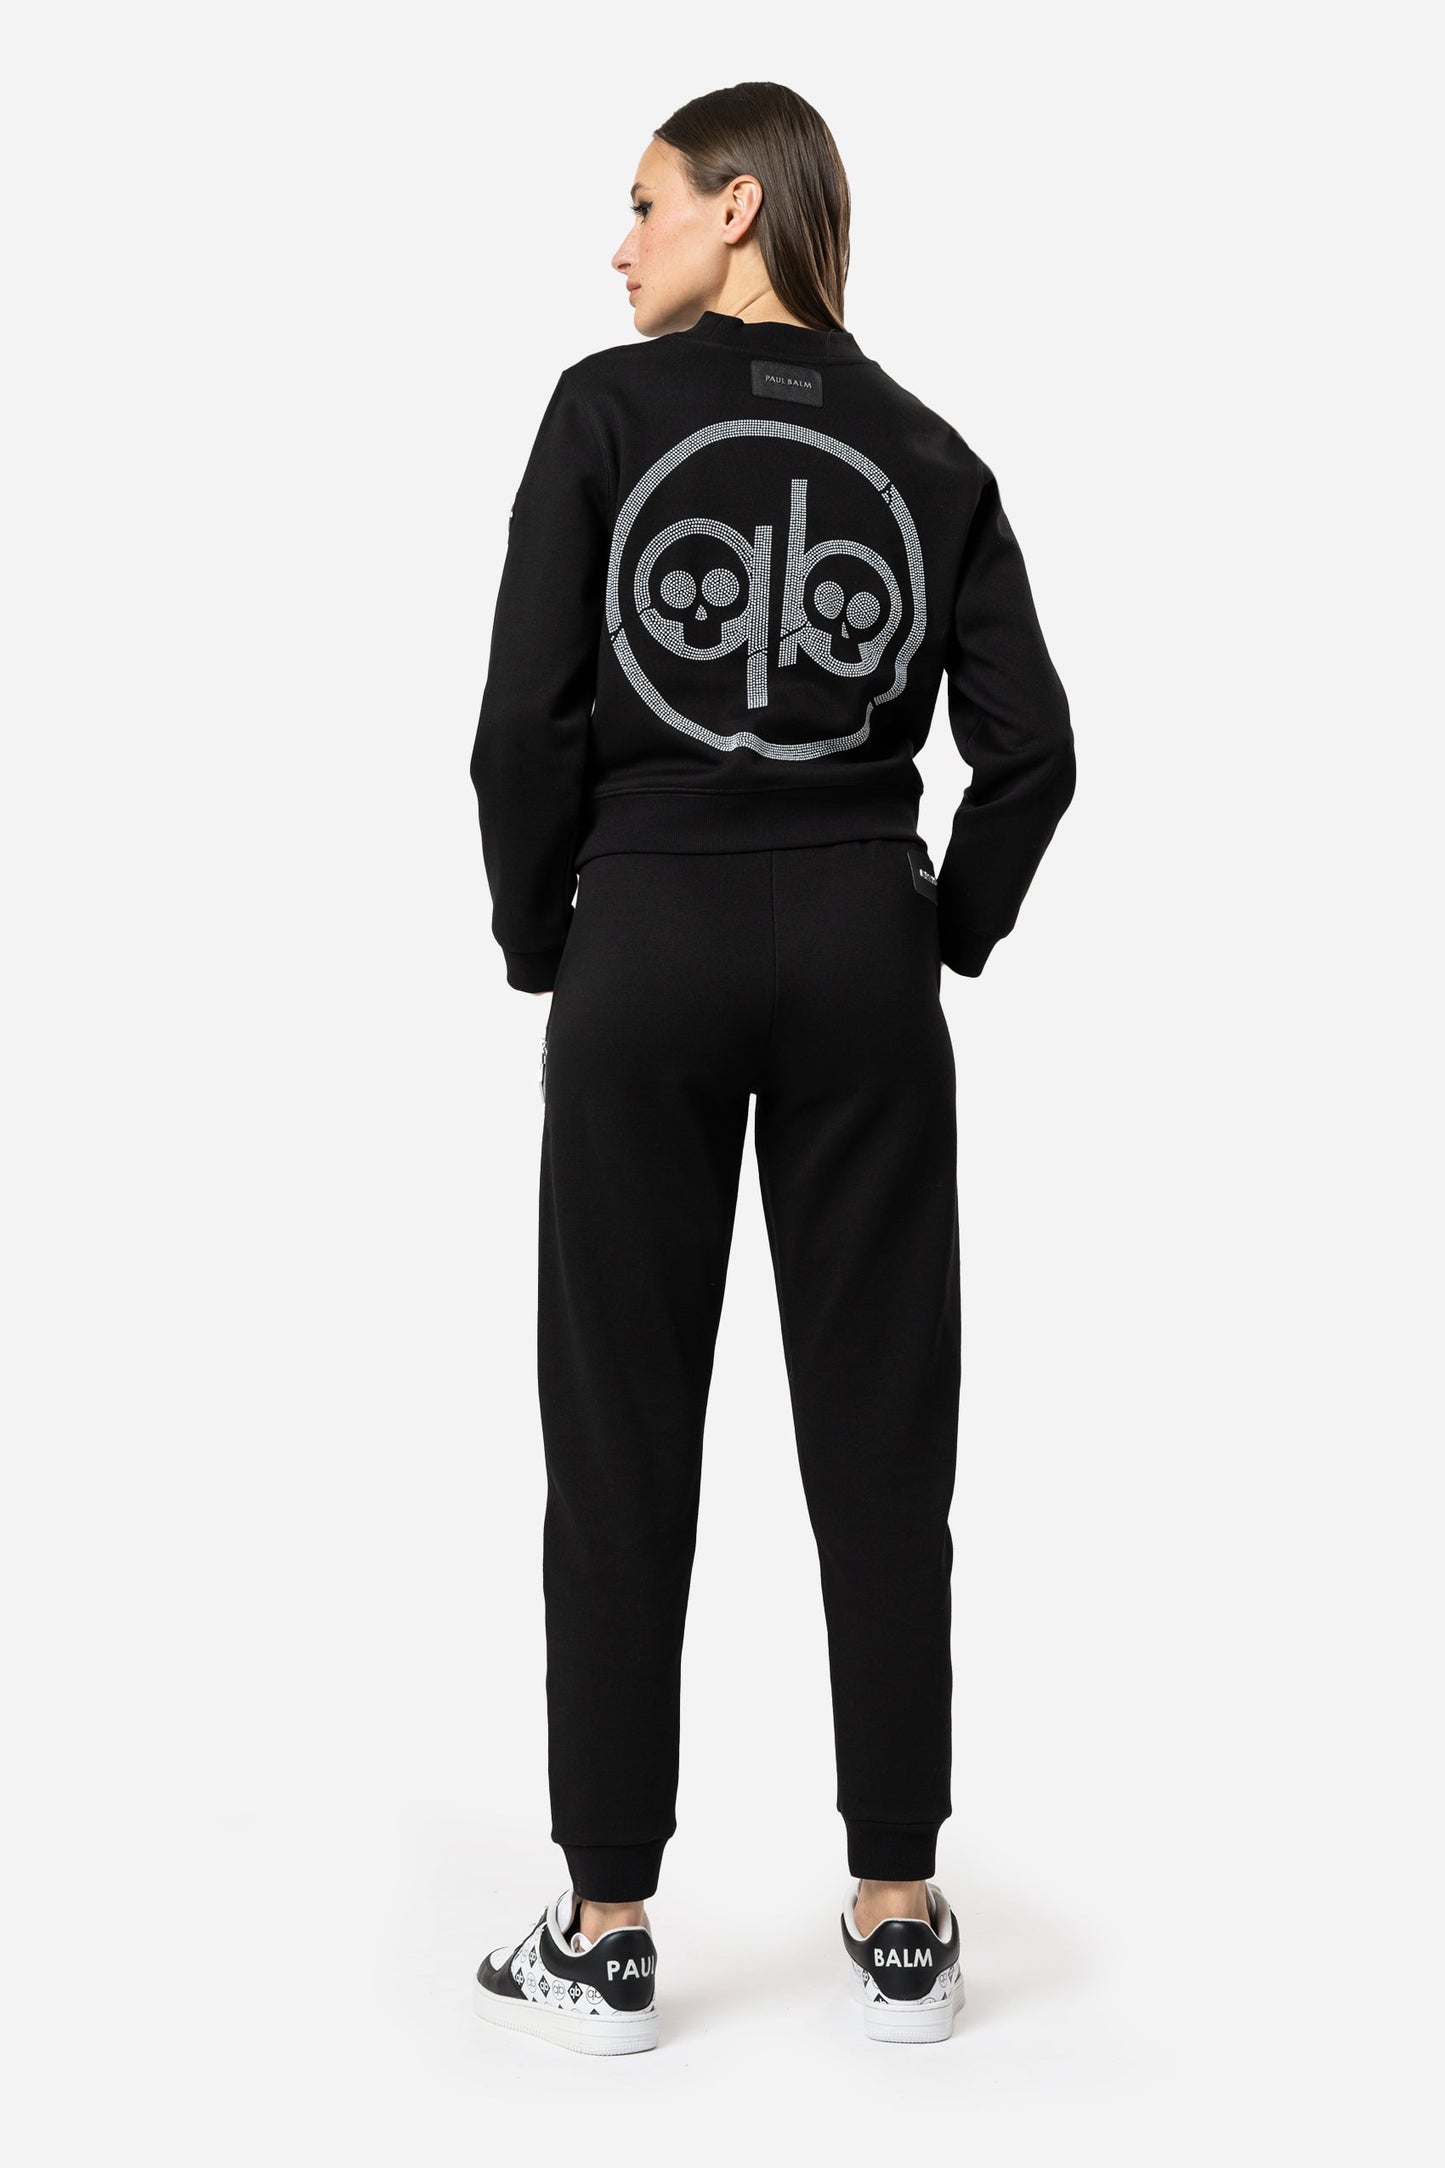 Embroidered Scull Sweatshirt - Limited to 300